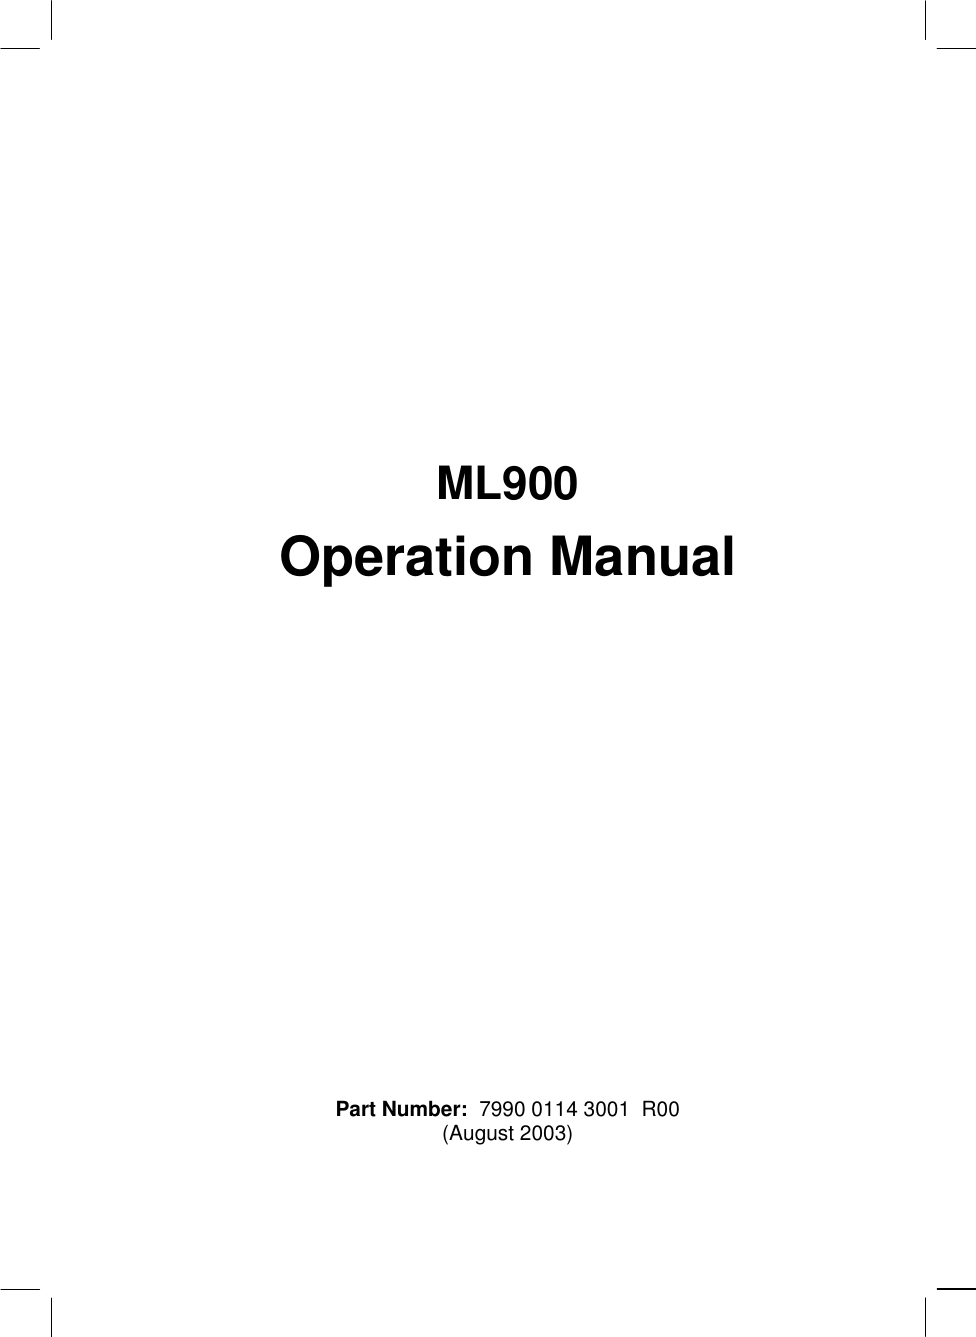           ML900 Operation Manual             Part Number:  7990 0114 3001  R00 (August 2003)  